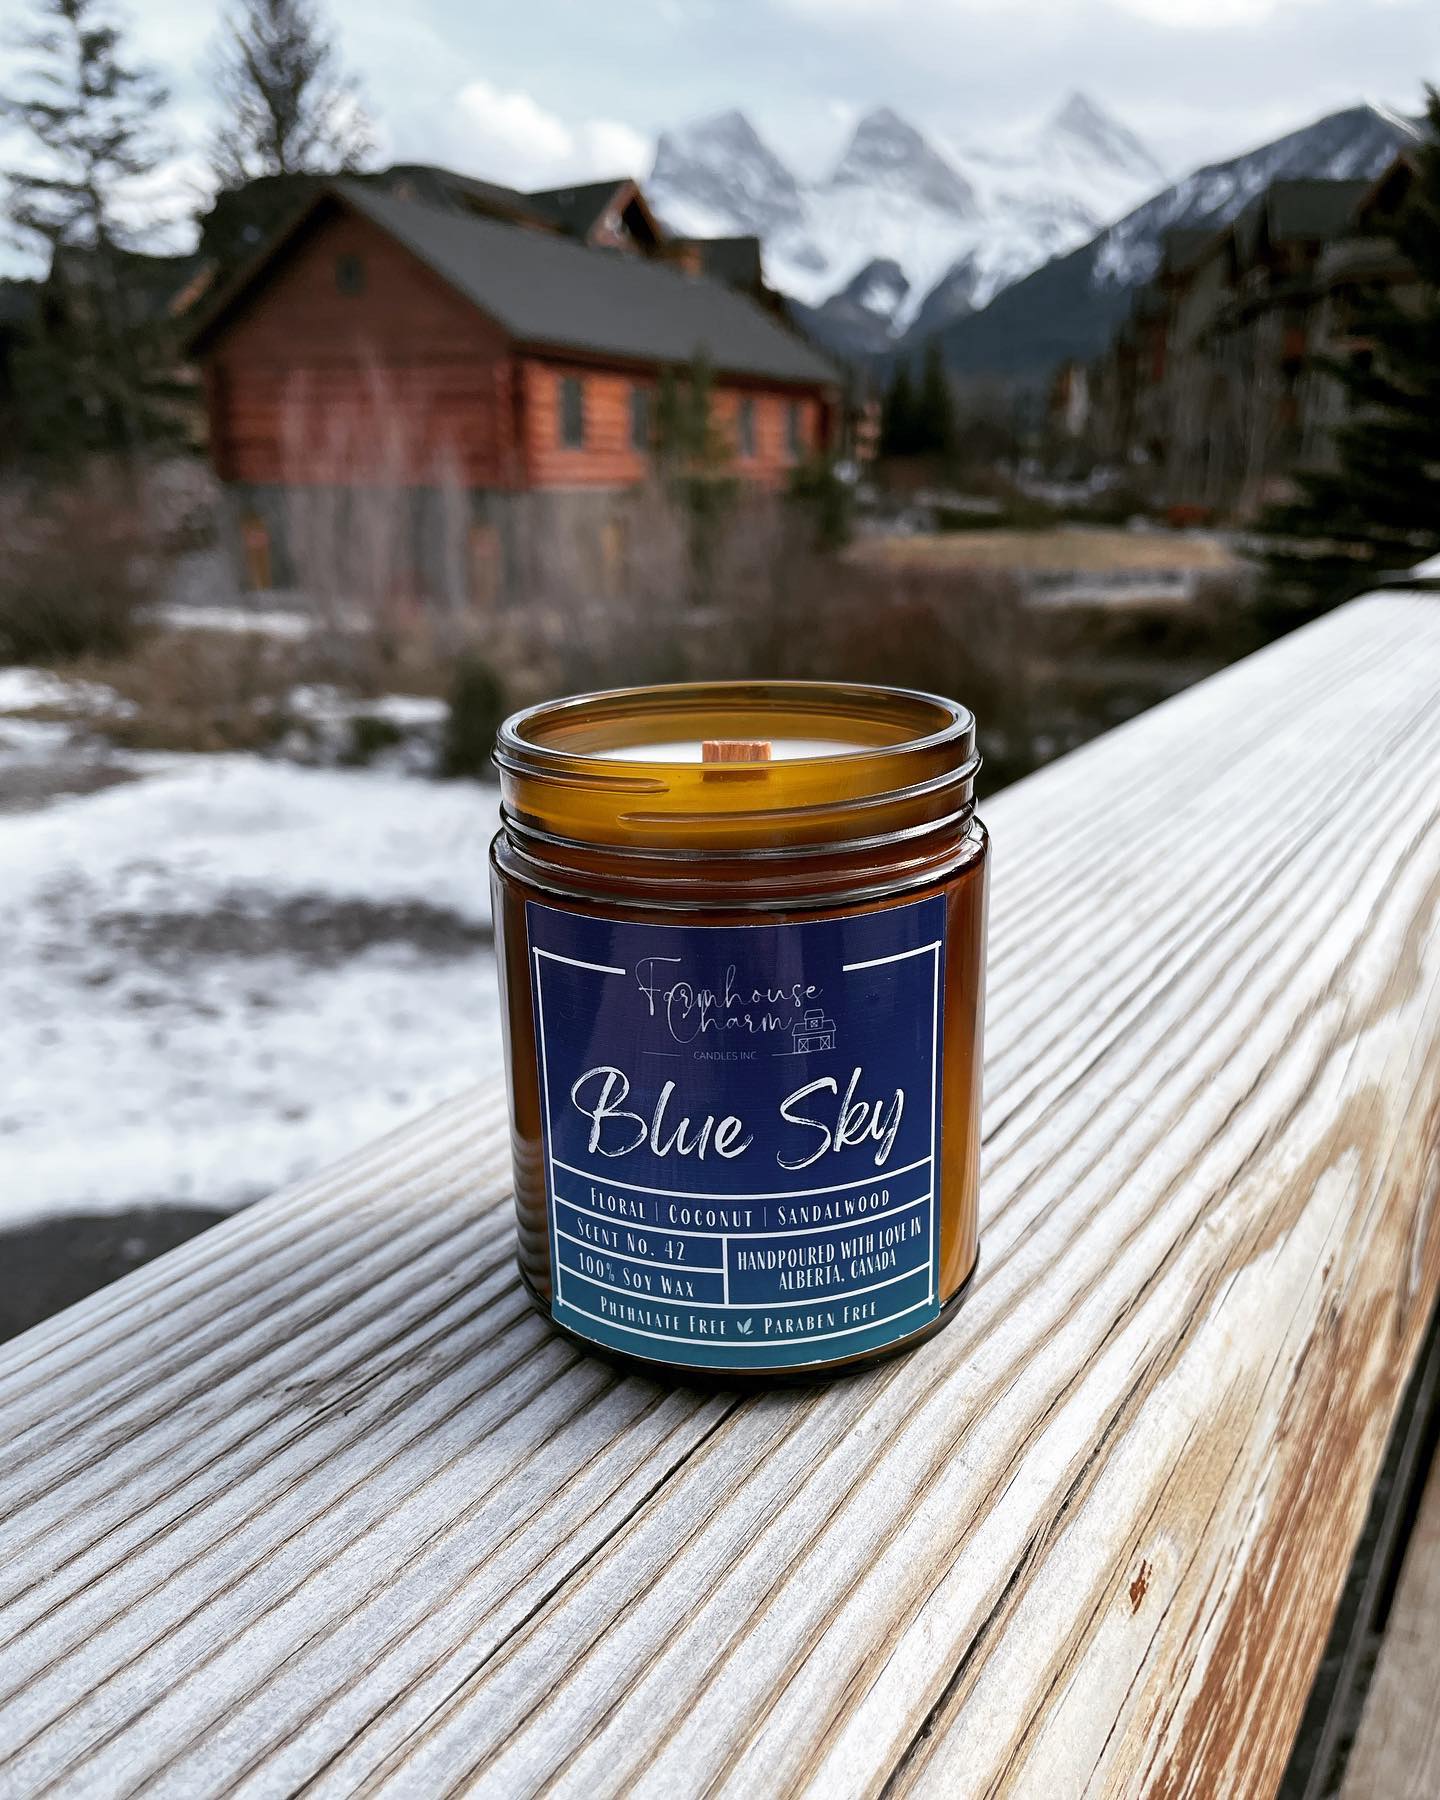 Blue Sky - Farmhouse Charm Soy Candle has a delightful blend of floral, coconut, and sandalwood scents that will fill your home with a calming atmosphere. Floral notes of fresh flowers and green botanicals create a soothing and inviting atmosphere, while the coconut and sandalwood create a warm and comforting ambience. Together, these  scents combine to create an atmosphere that evoke the feeling of a bright and sunny spring day!www.farmhousecharmcandles.com